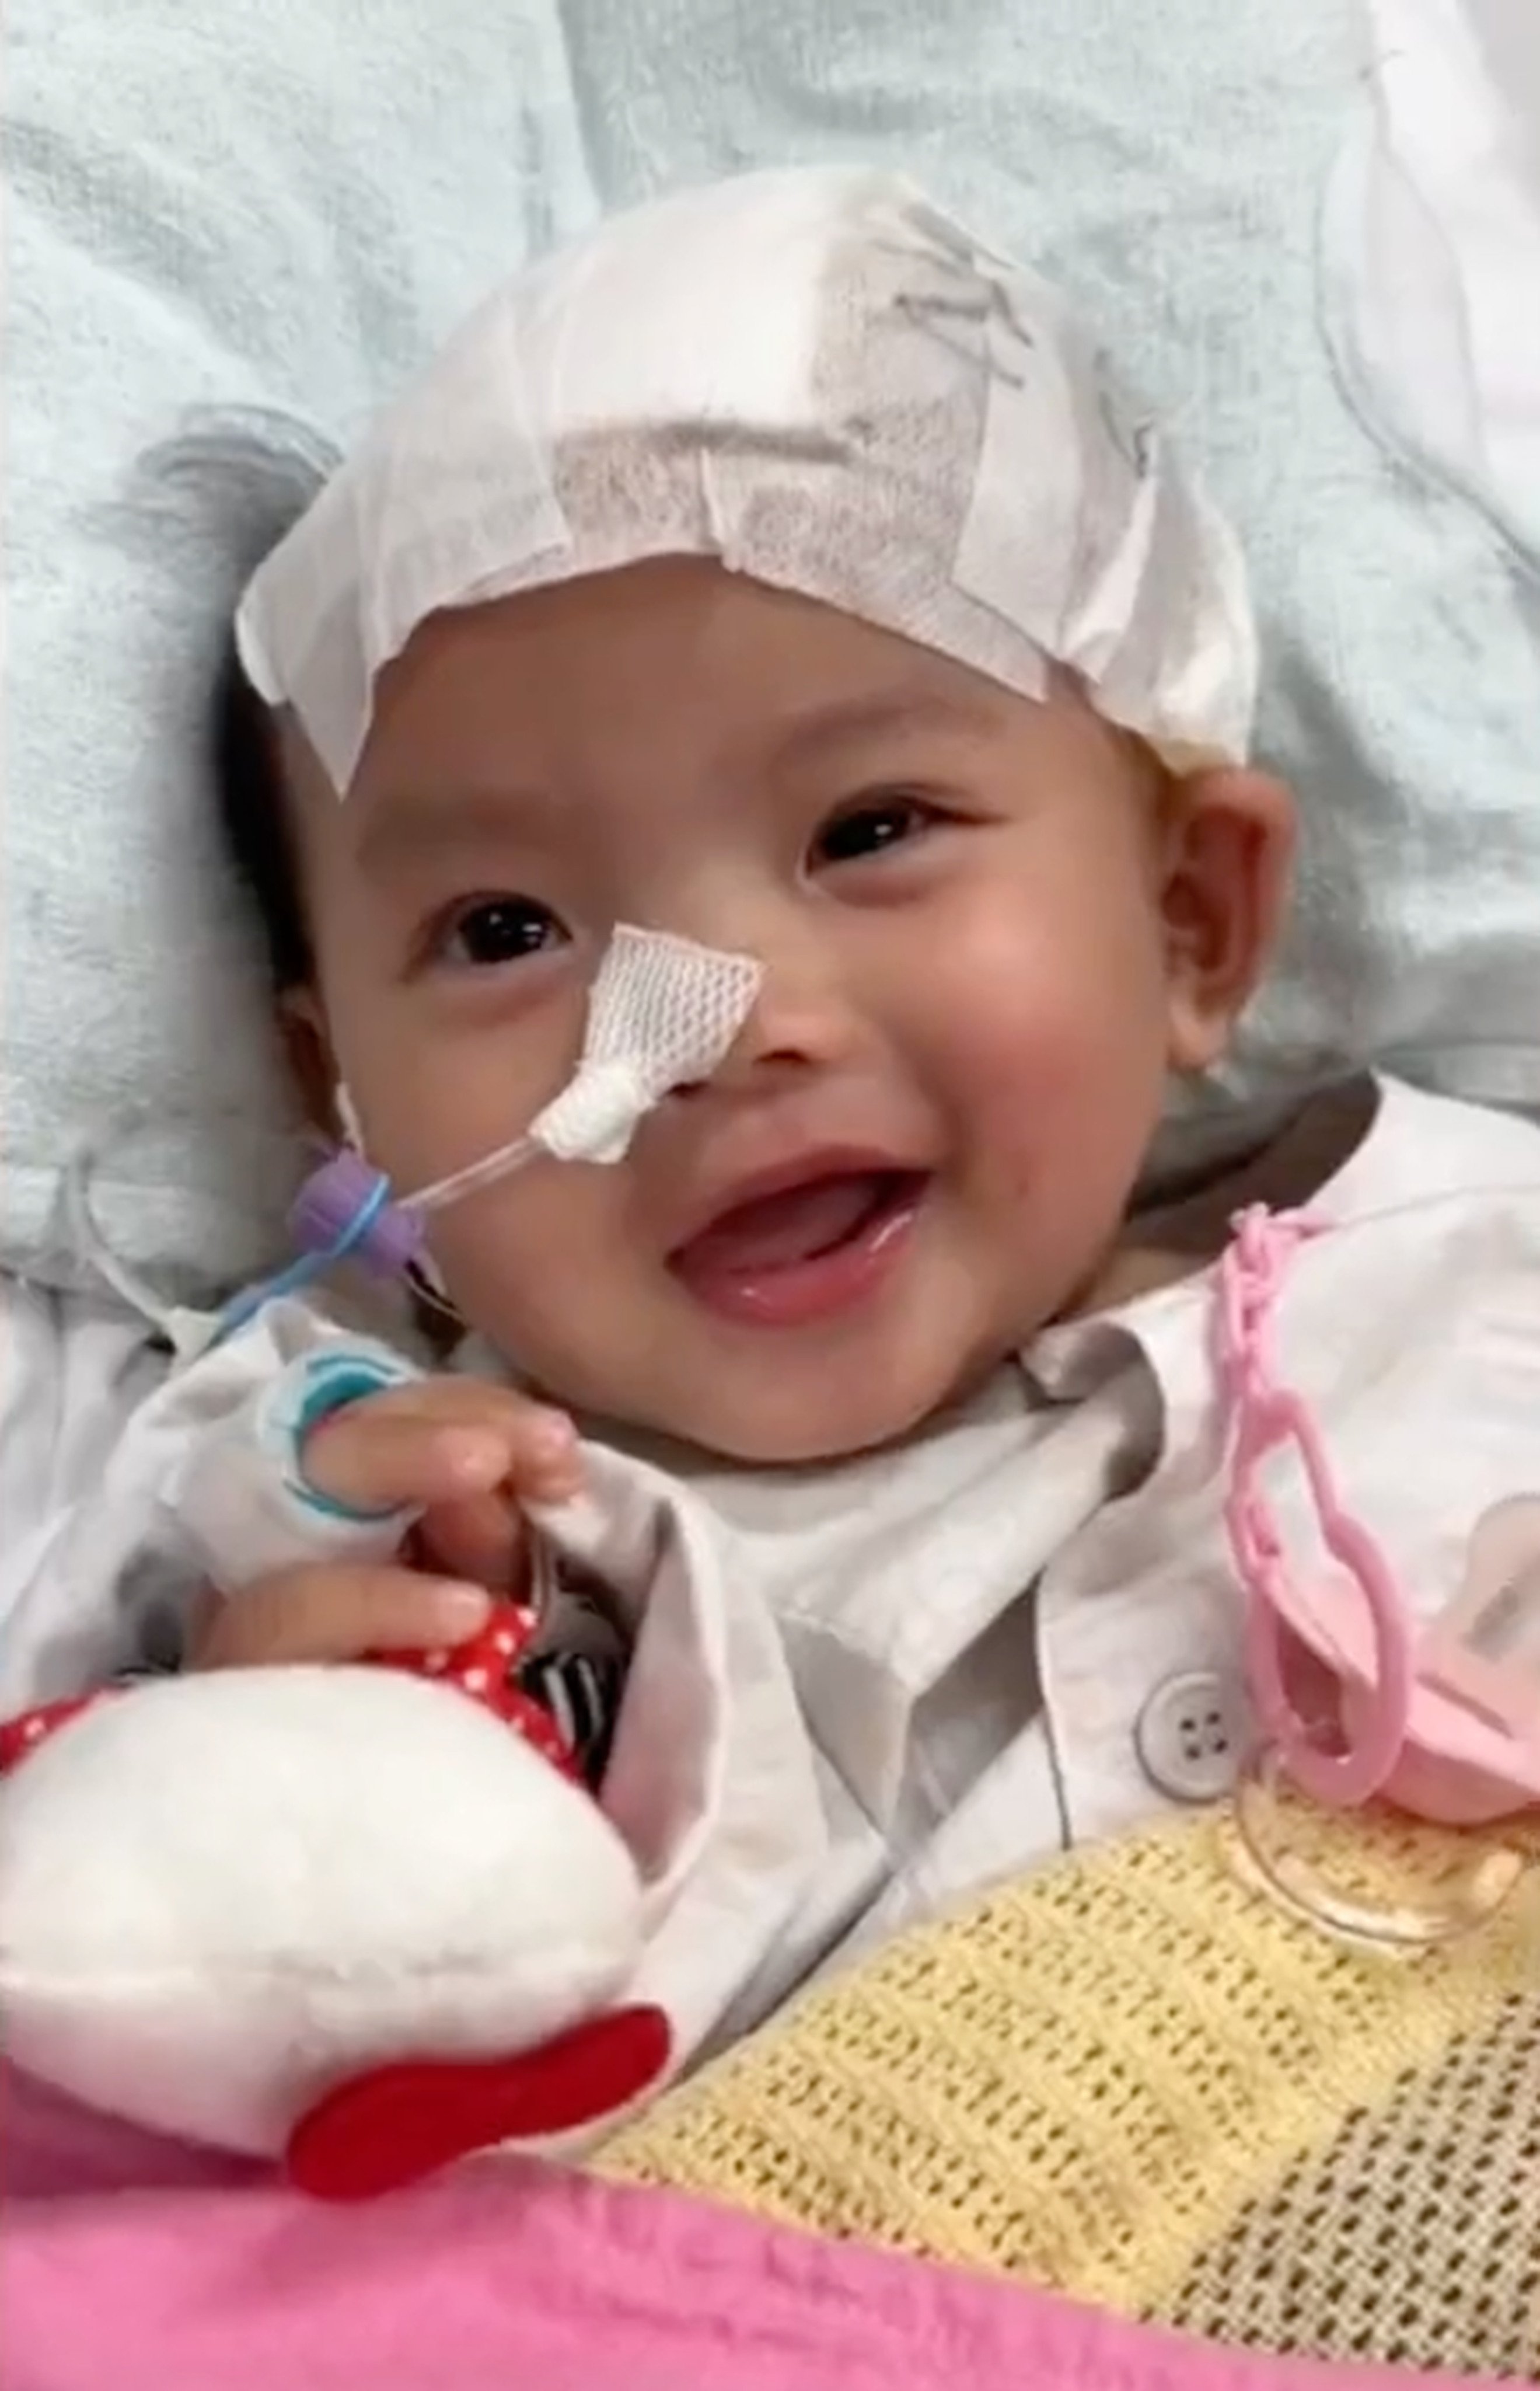 ‘Little Suet Yee’ suffered serious brain injuries in January when she was nine months old, after being allegedly abused by a babysitter. Photo: Facebook